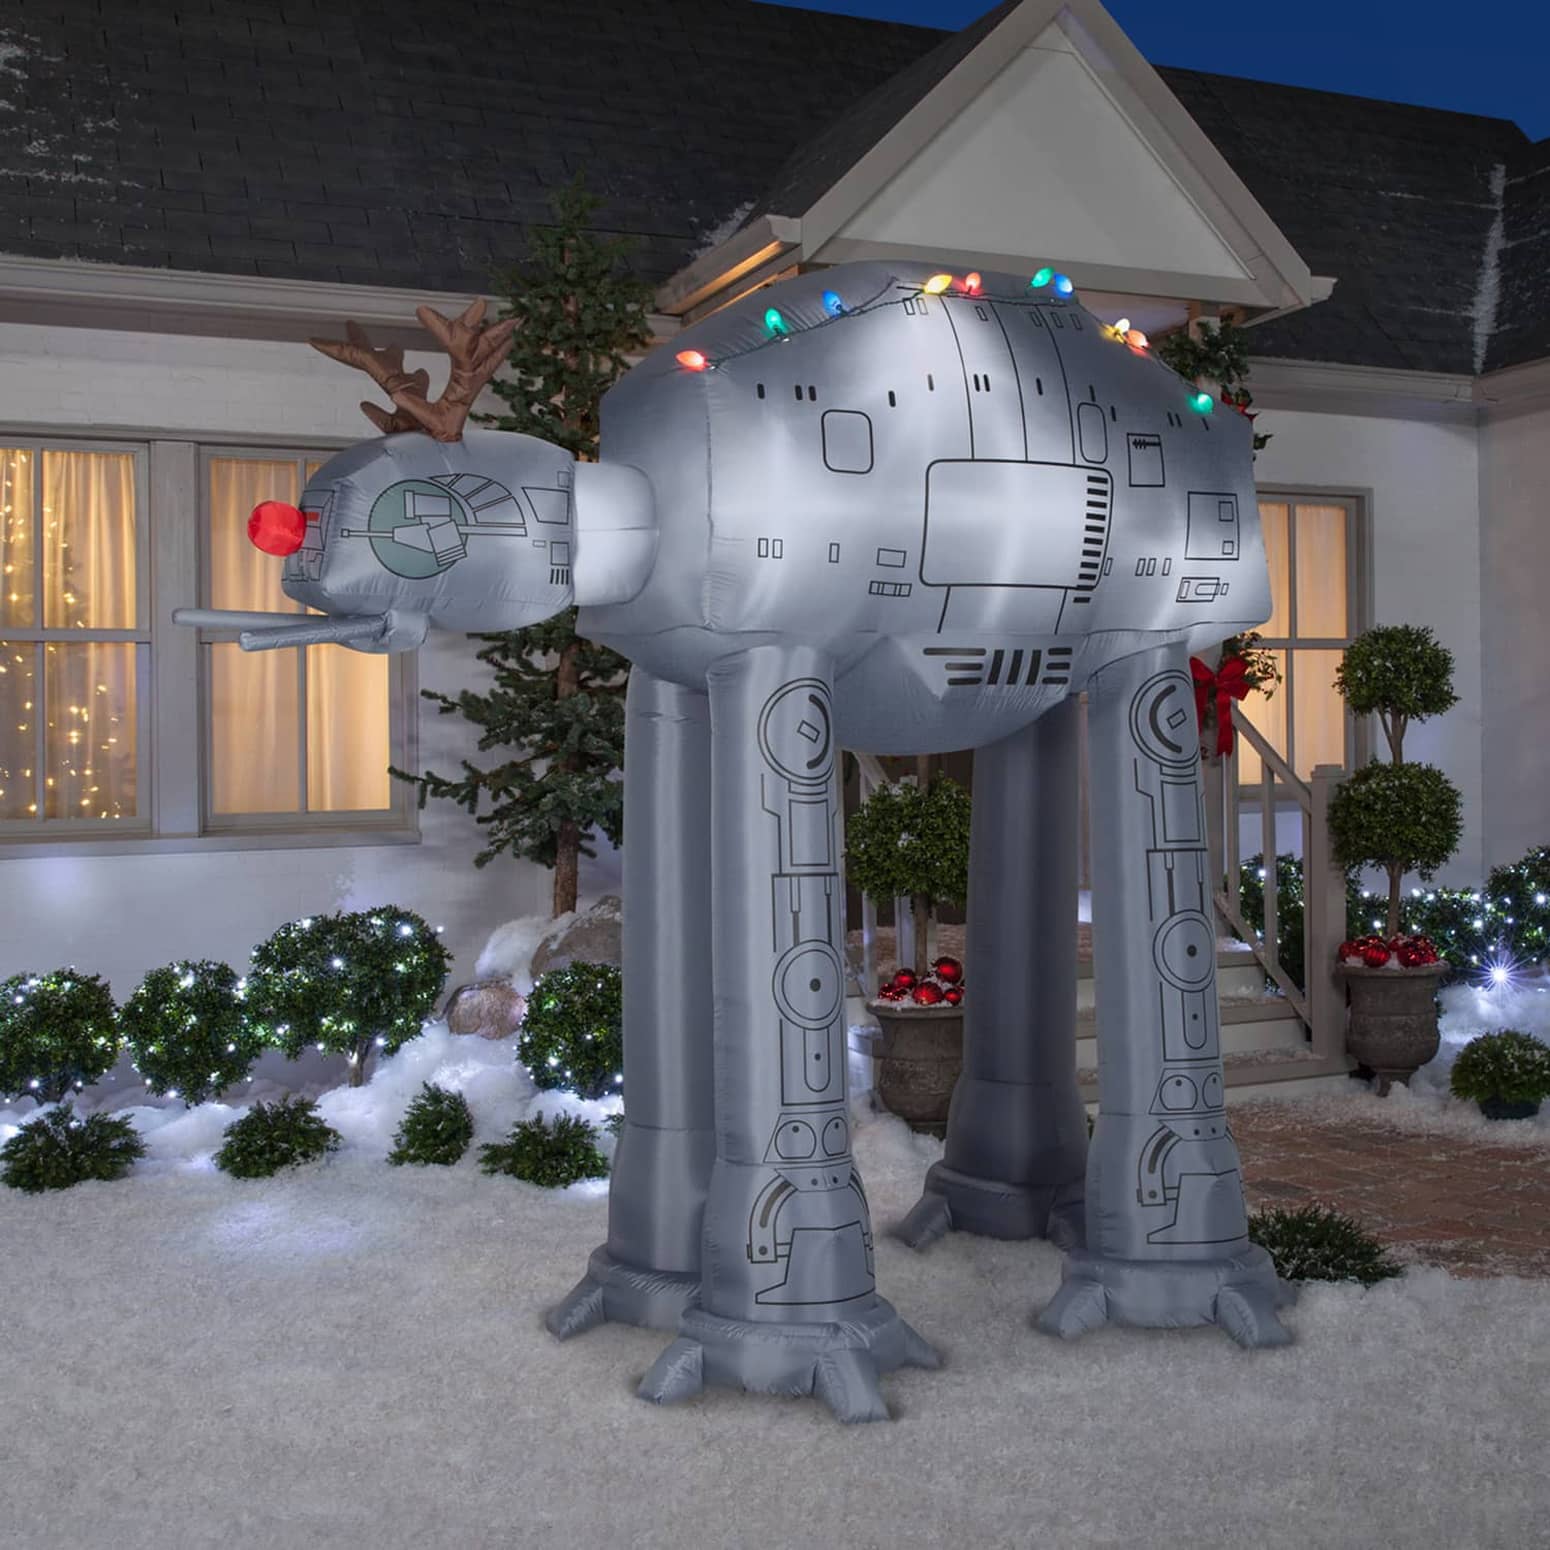 Giant Inflatable Star Wars AT-AT with Reindeer Antlers and Christmas Lights